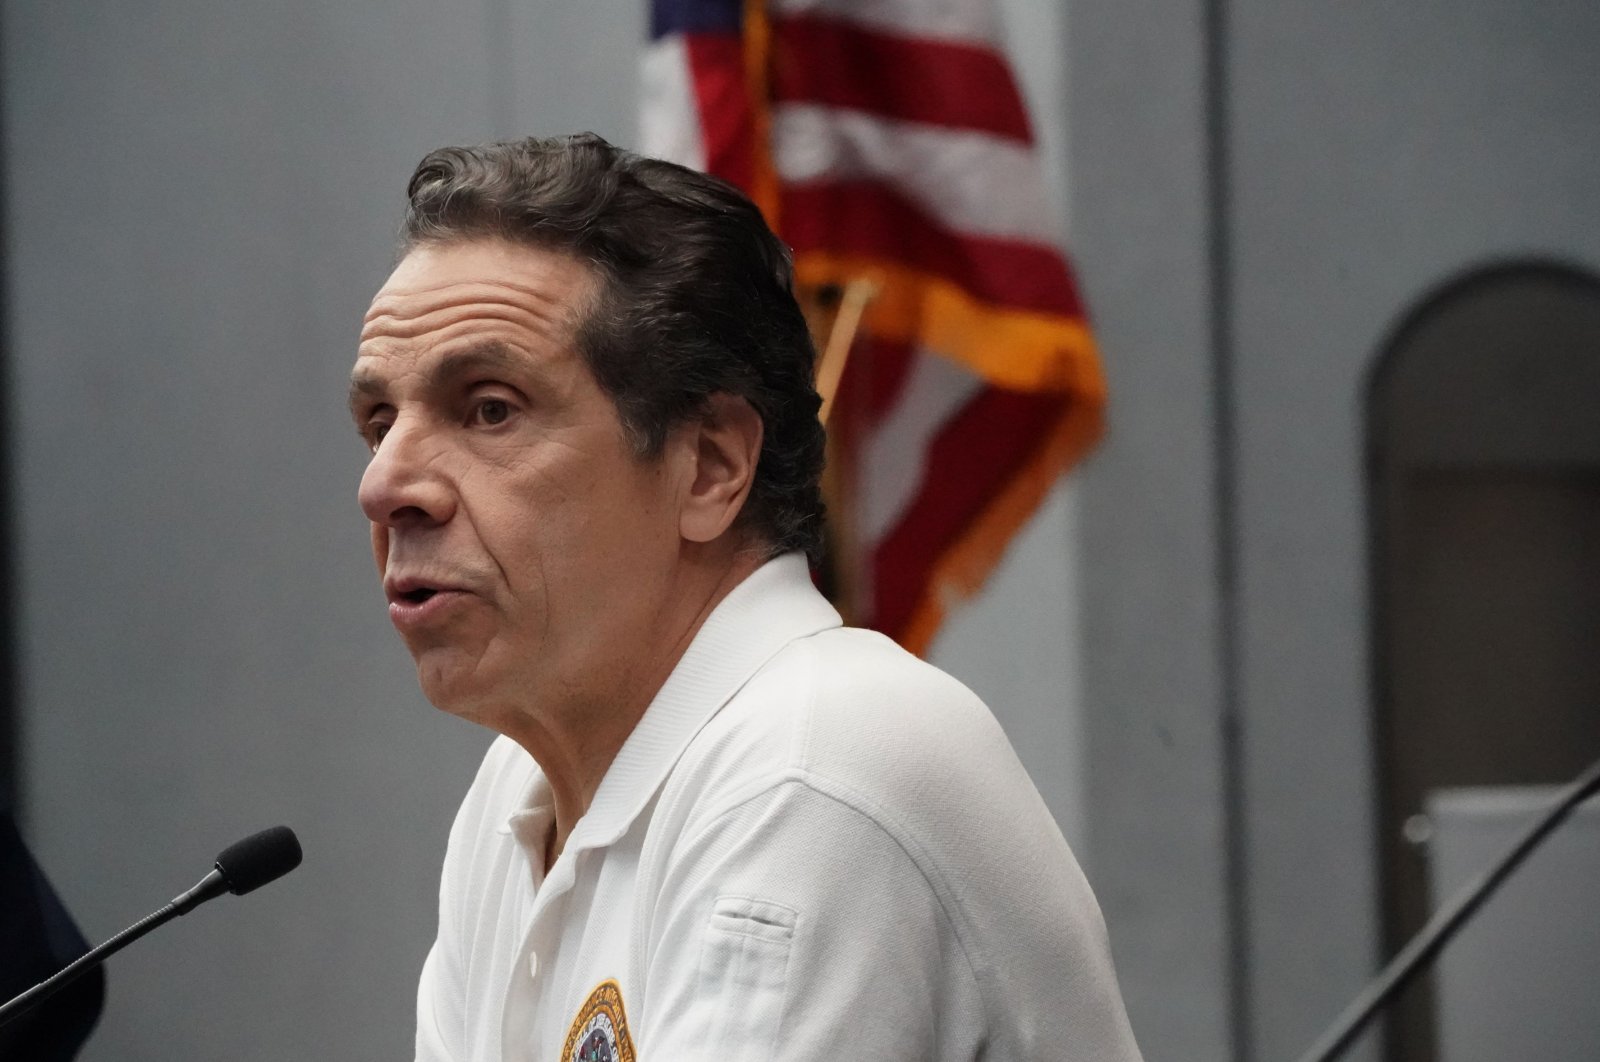 New York Governor Andrew Cuomo speaks to the press at the Jacob K. Javits Convention Center, New York, March 27, 2020. (AFP Photo)